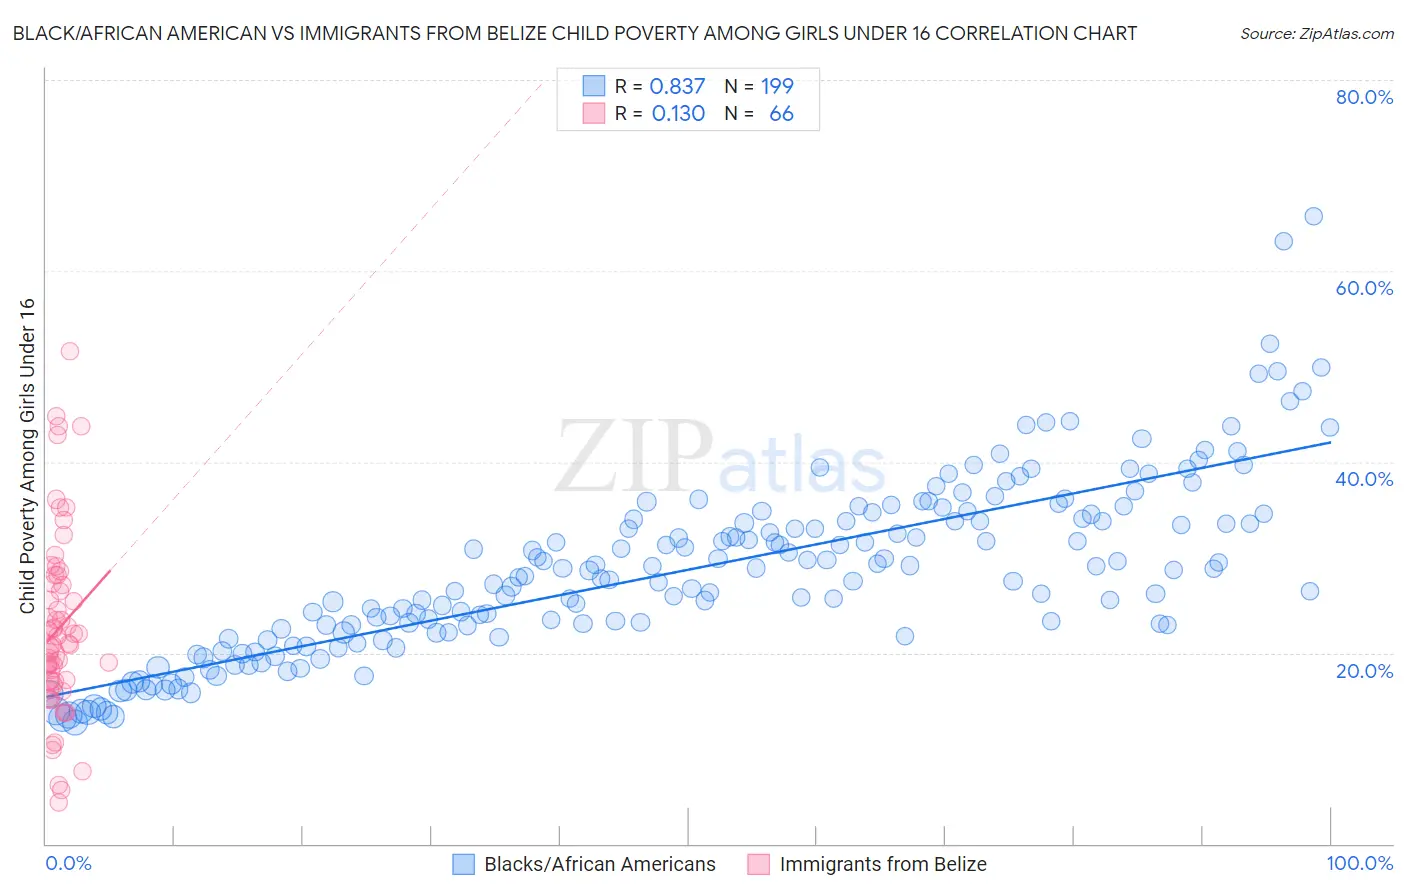 Black/African American vs Immigrants from Belize Child Poverty Among Girls Under 16